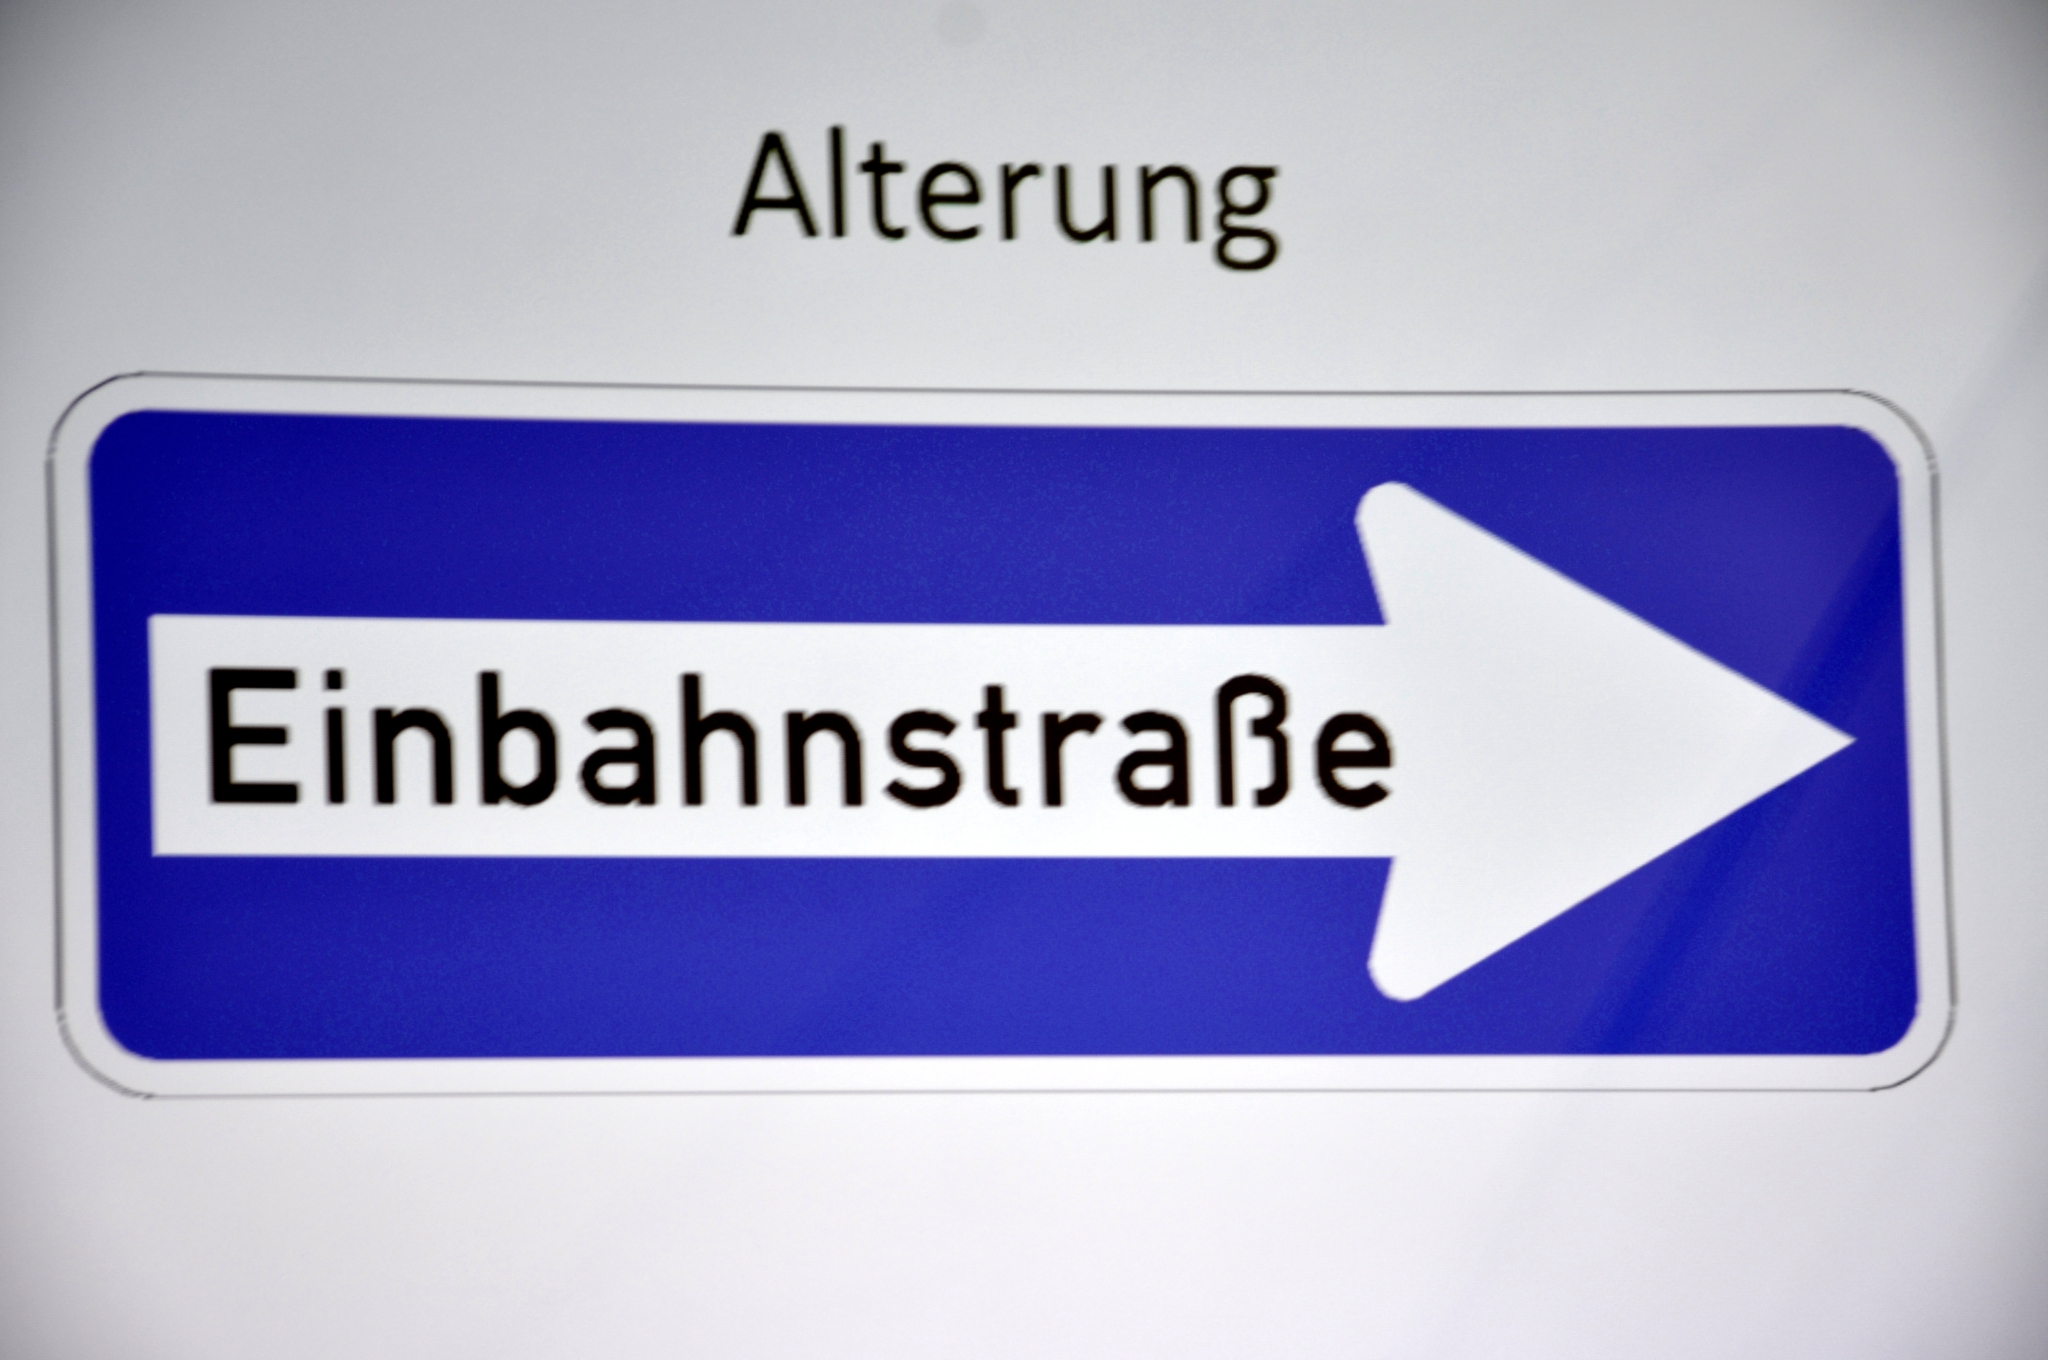 The photo shows a "one-way street" sign and the word "Alterung", which means "ageing" written above it.